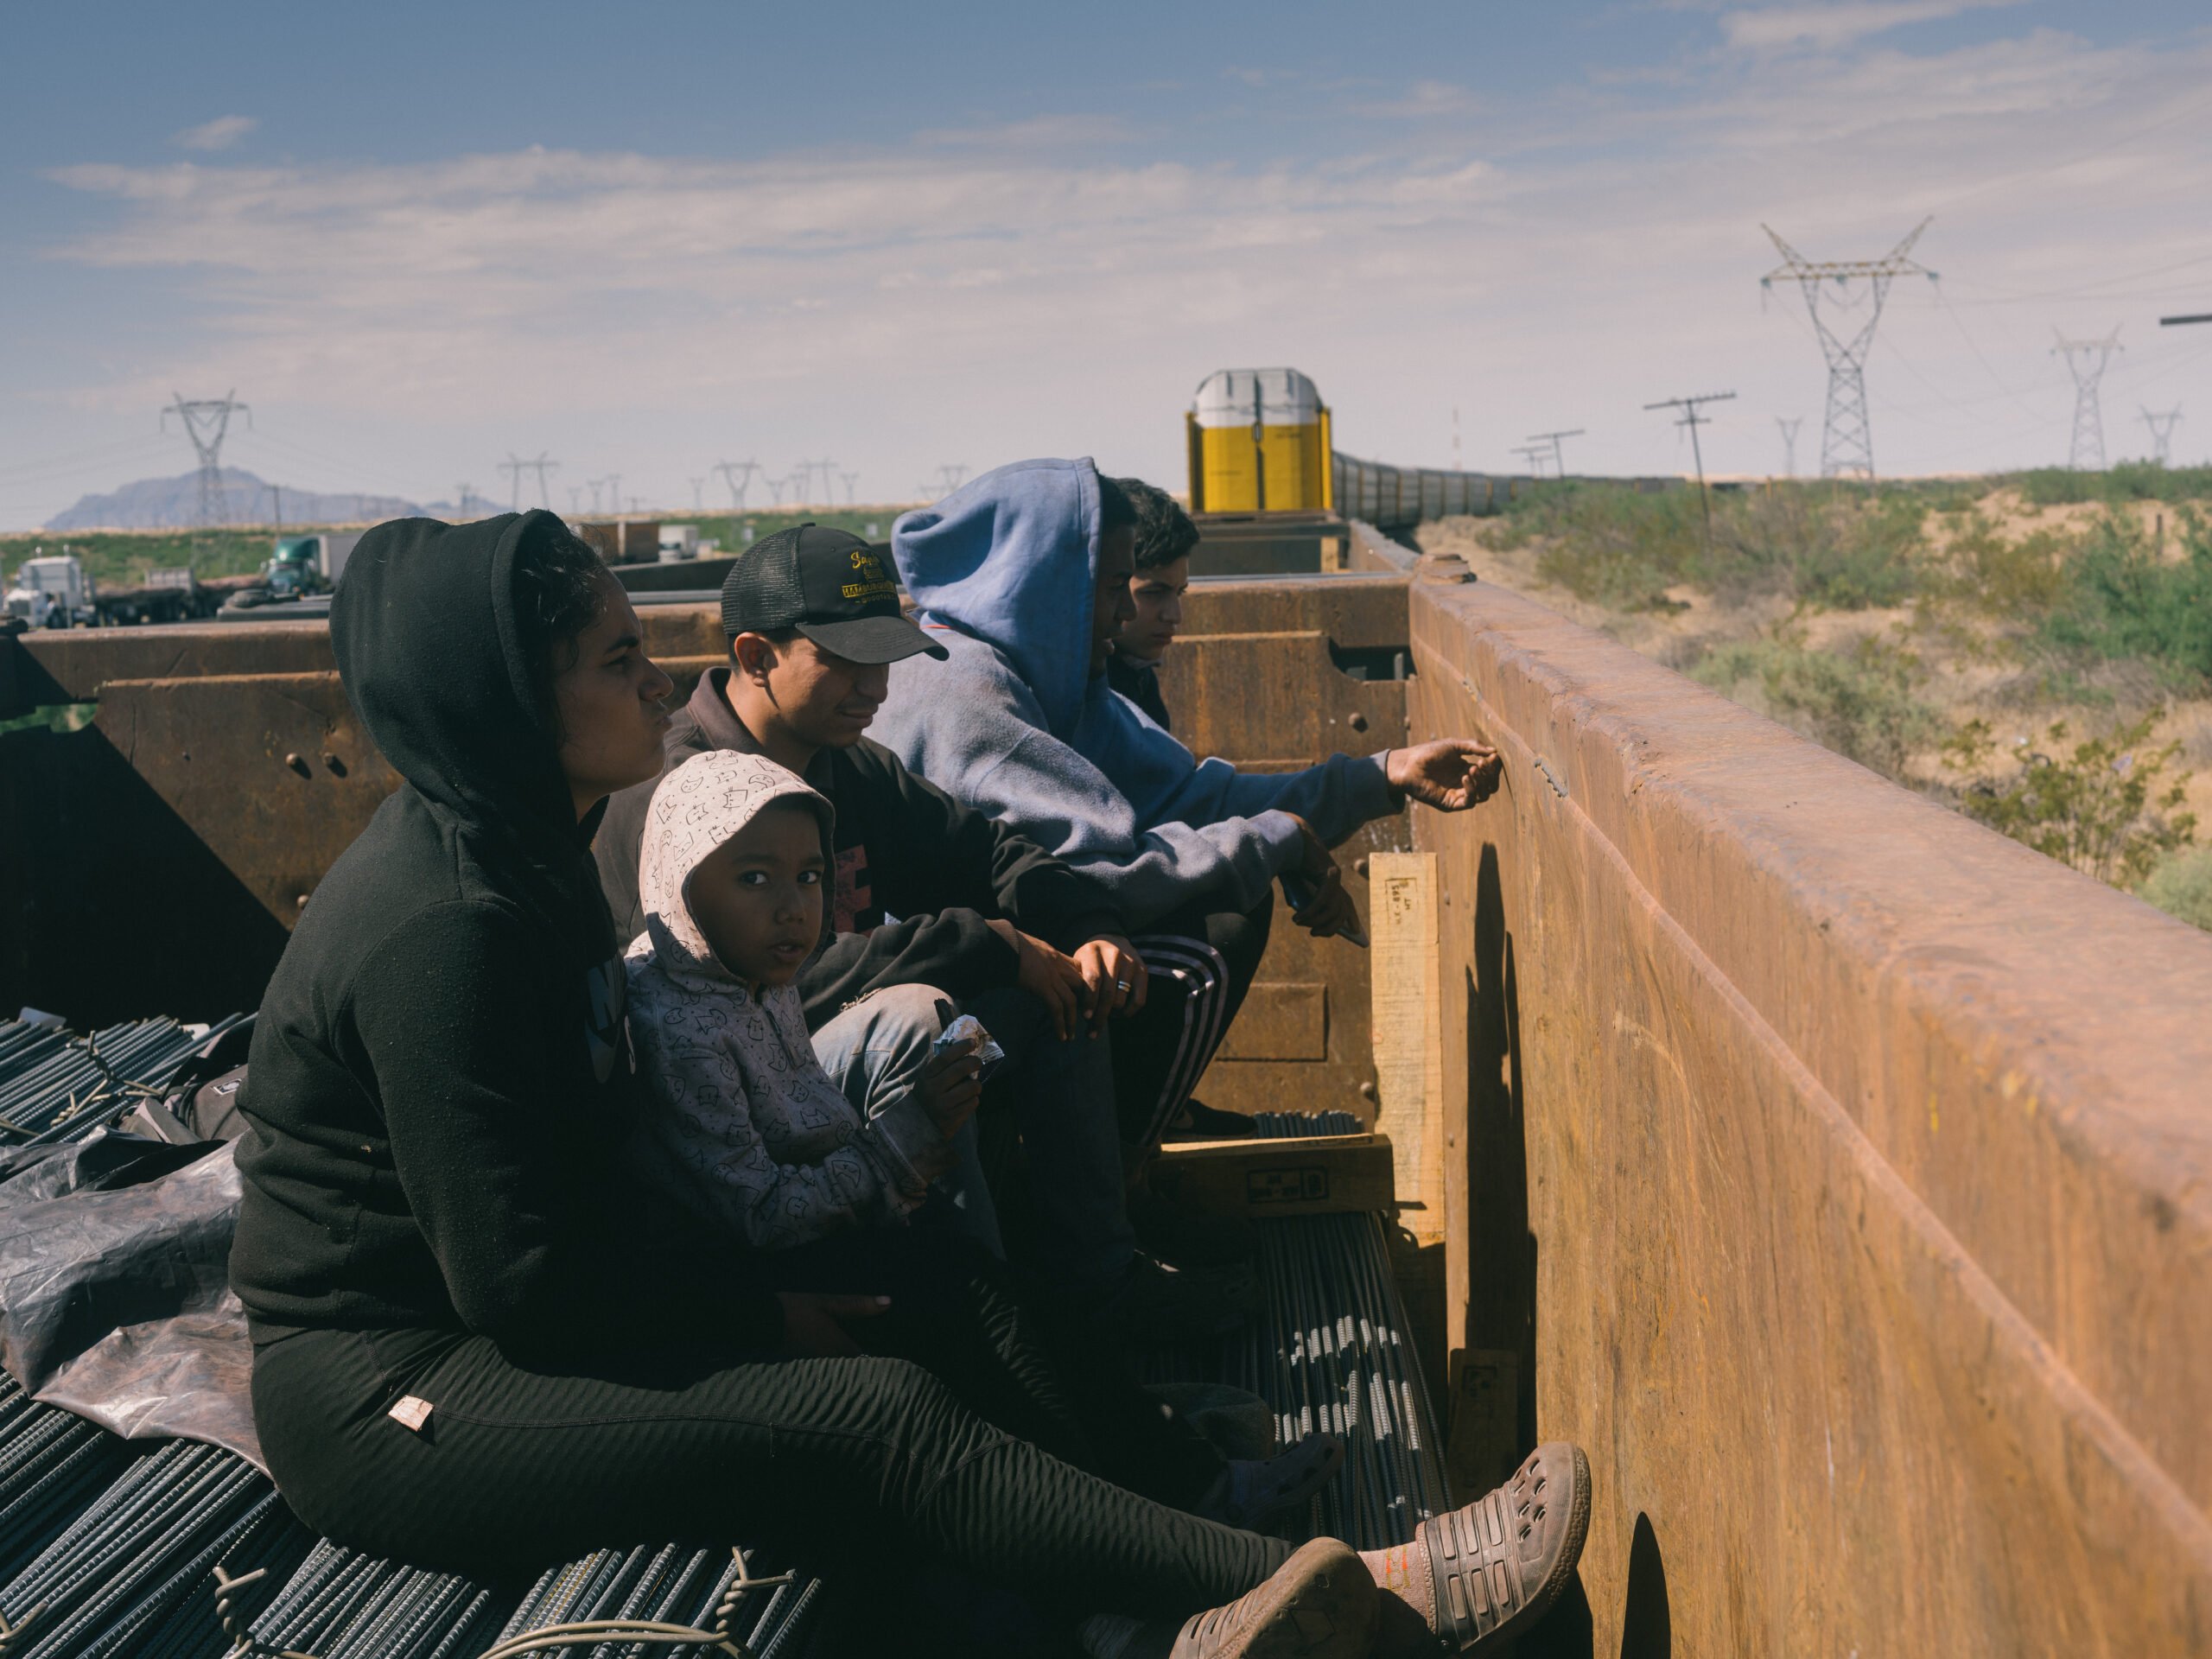 The four member family uncomfortably half sits, half squats atop the rebar bundles, one bracing himself against the wall of the train car. The spiky metal twist ties surround them as the train moves rapidly through the scrub-filled desert.